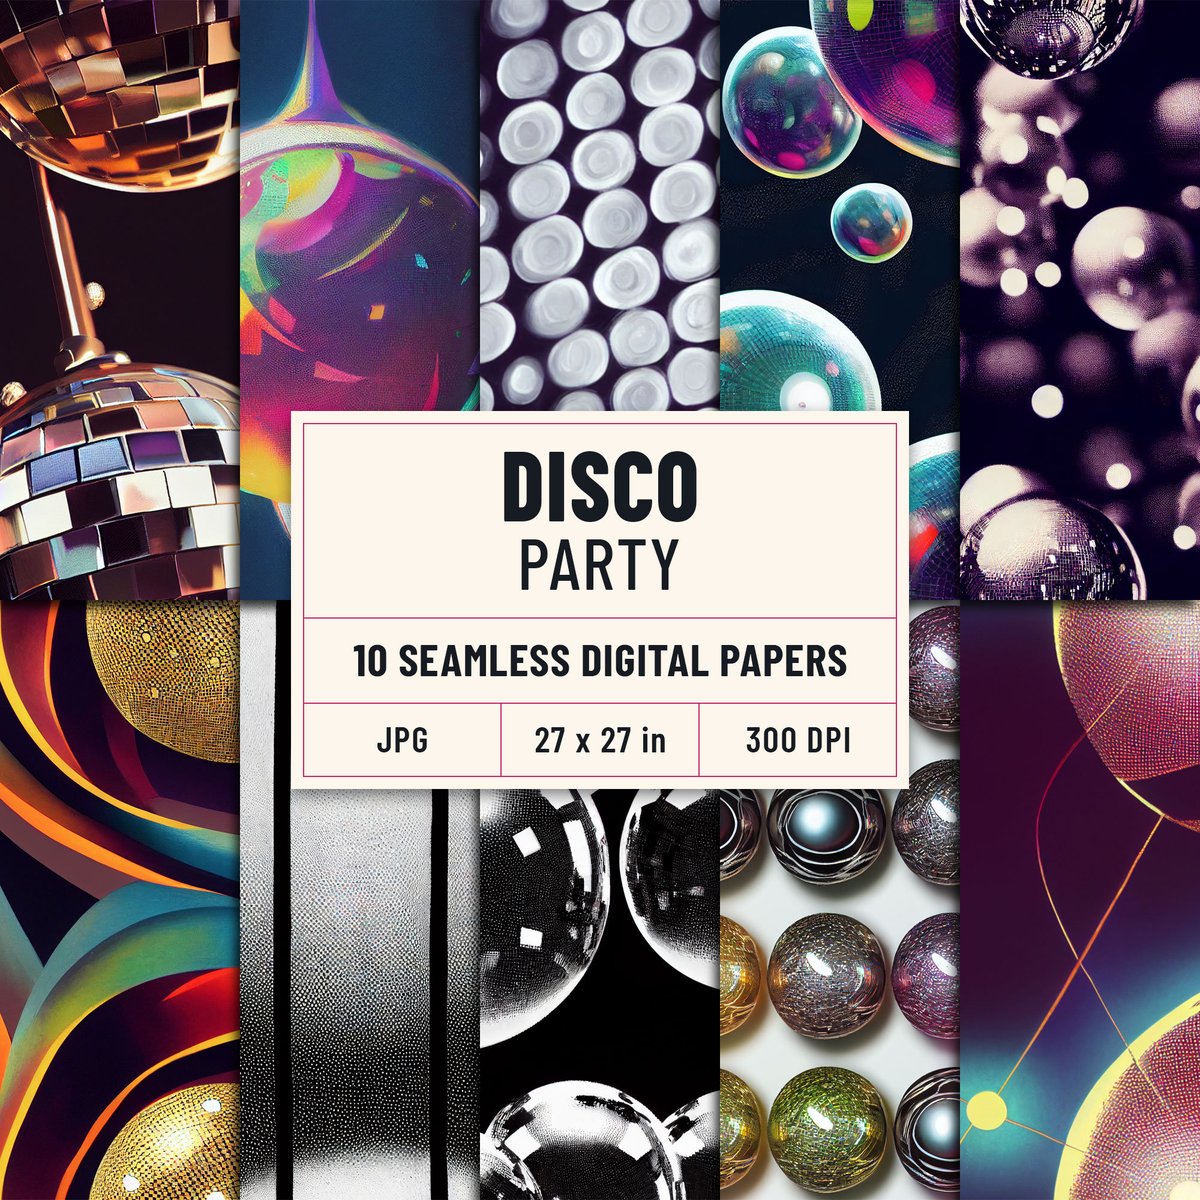 The Disco Party Digital Scrapbook Collection is an exquisitely designed set of printable images and seamless designs that are perfect for crafting and scrapbooking. #abstractgeometric #seamlessrepeat #digitalpaperpack #seamlesspatterns #printablepatterns